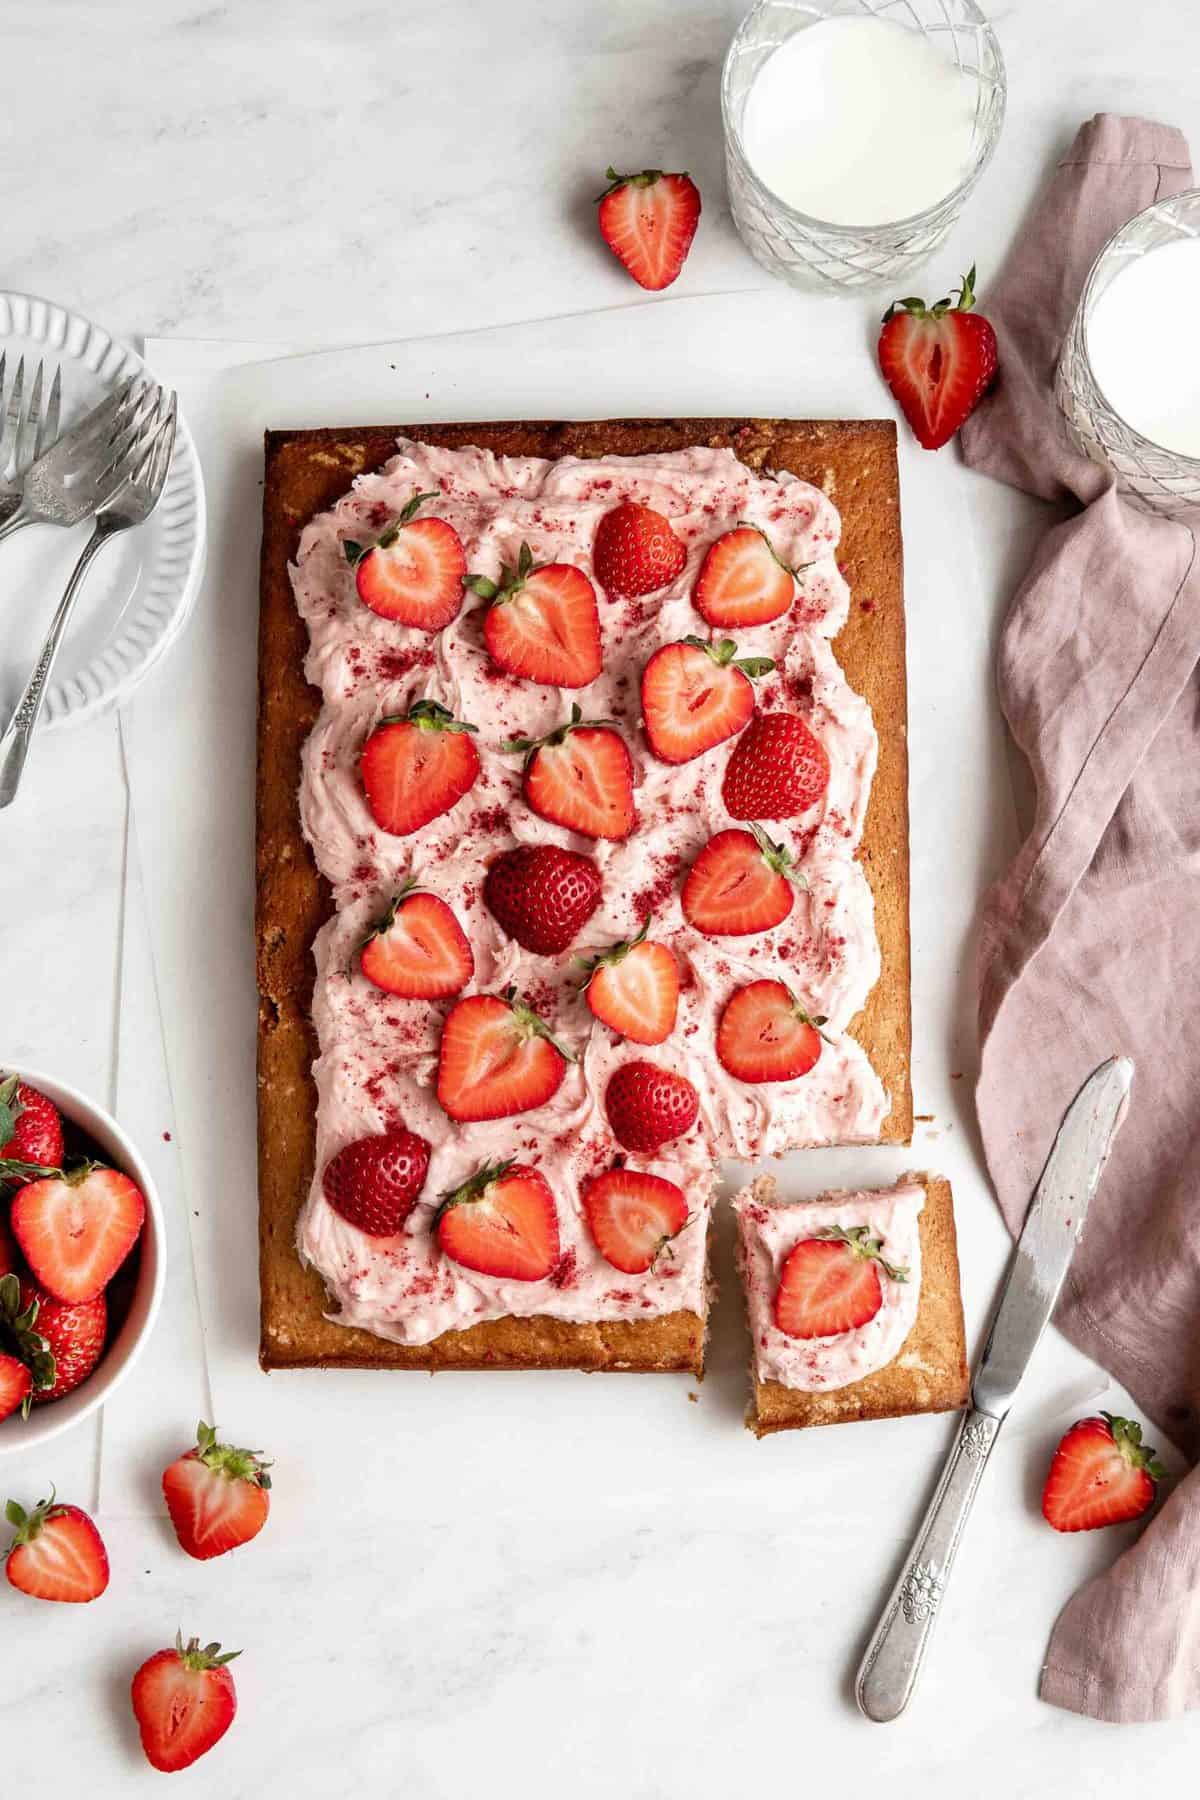 Strawberry sheet cake with strawberry cream cheese frosting topped with sliced strawberries.